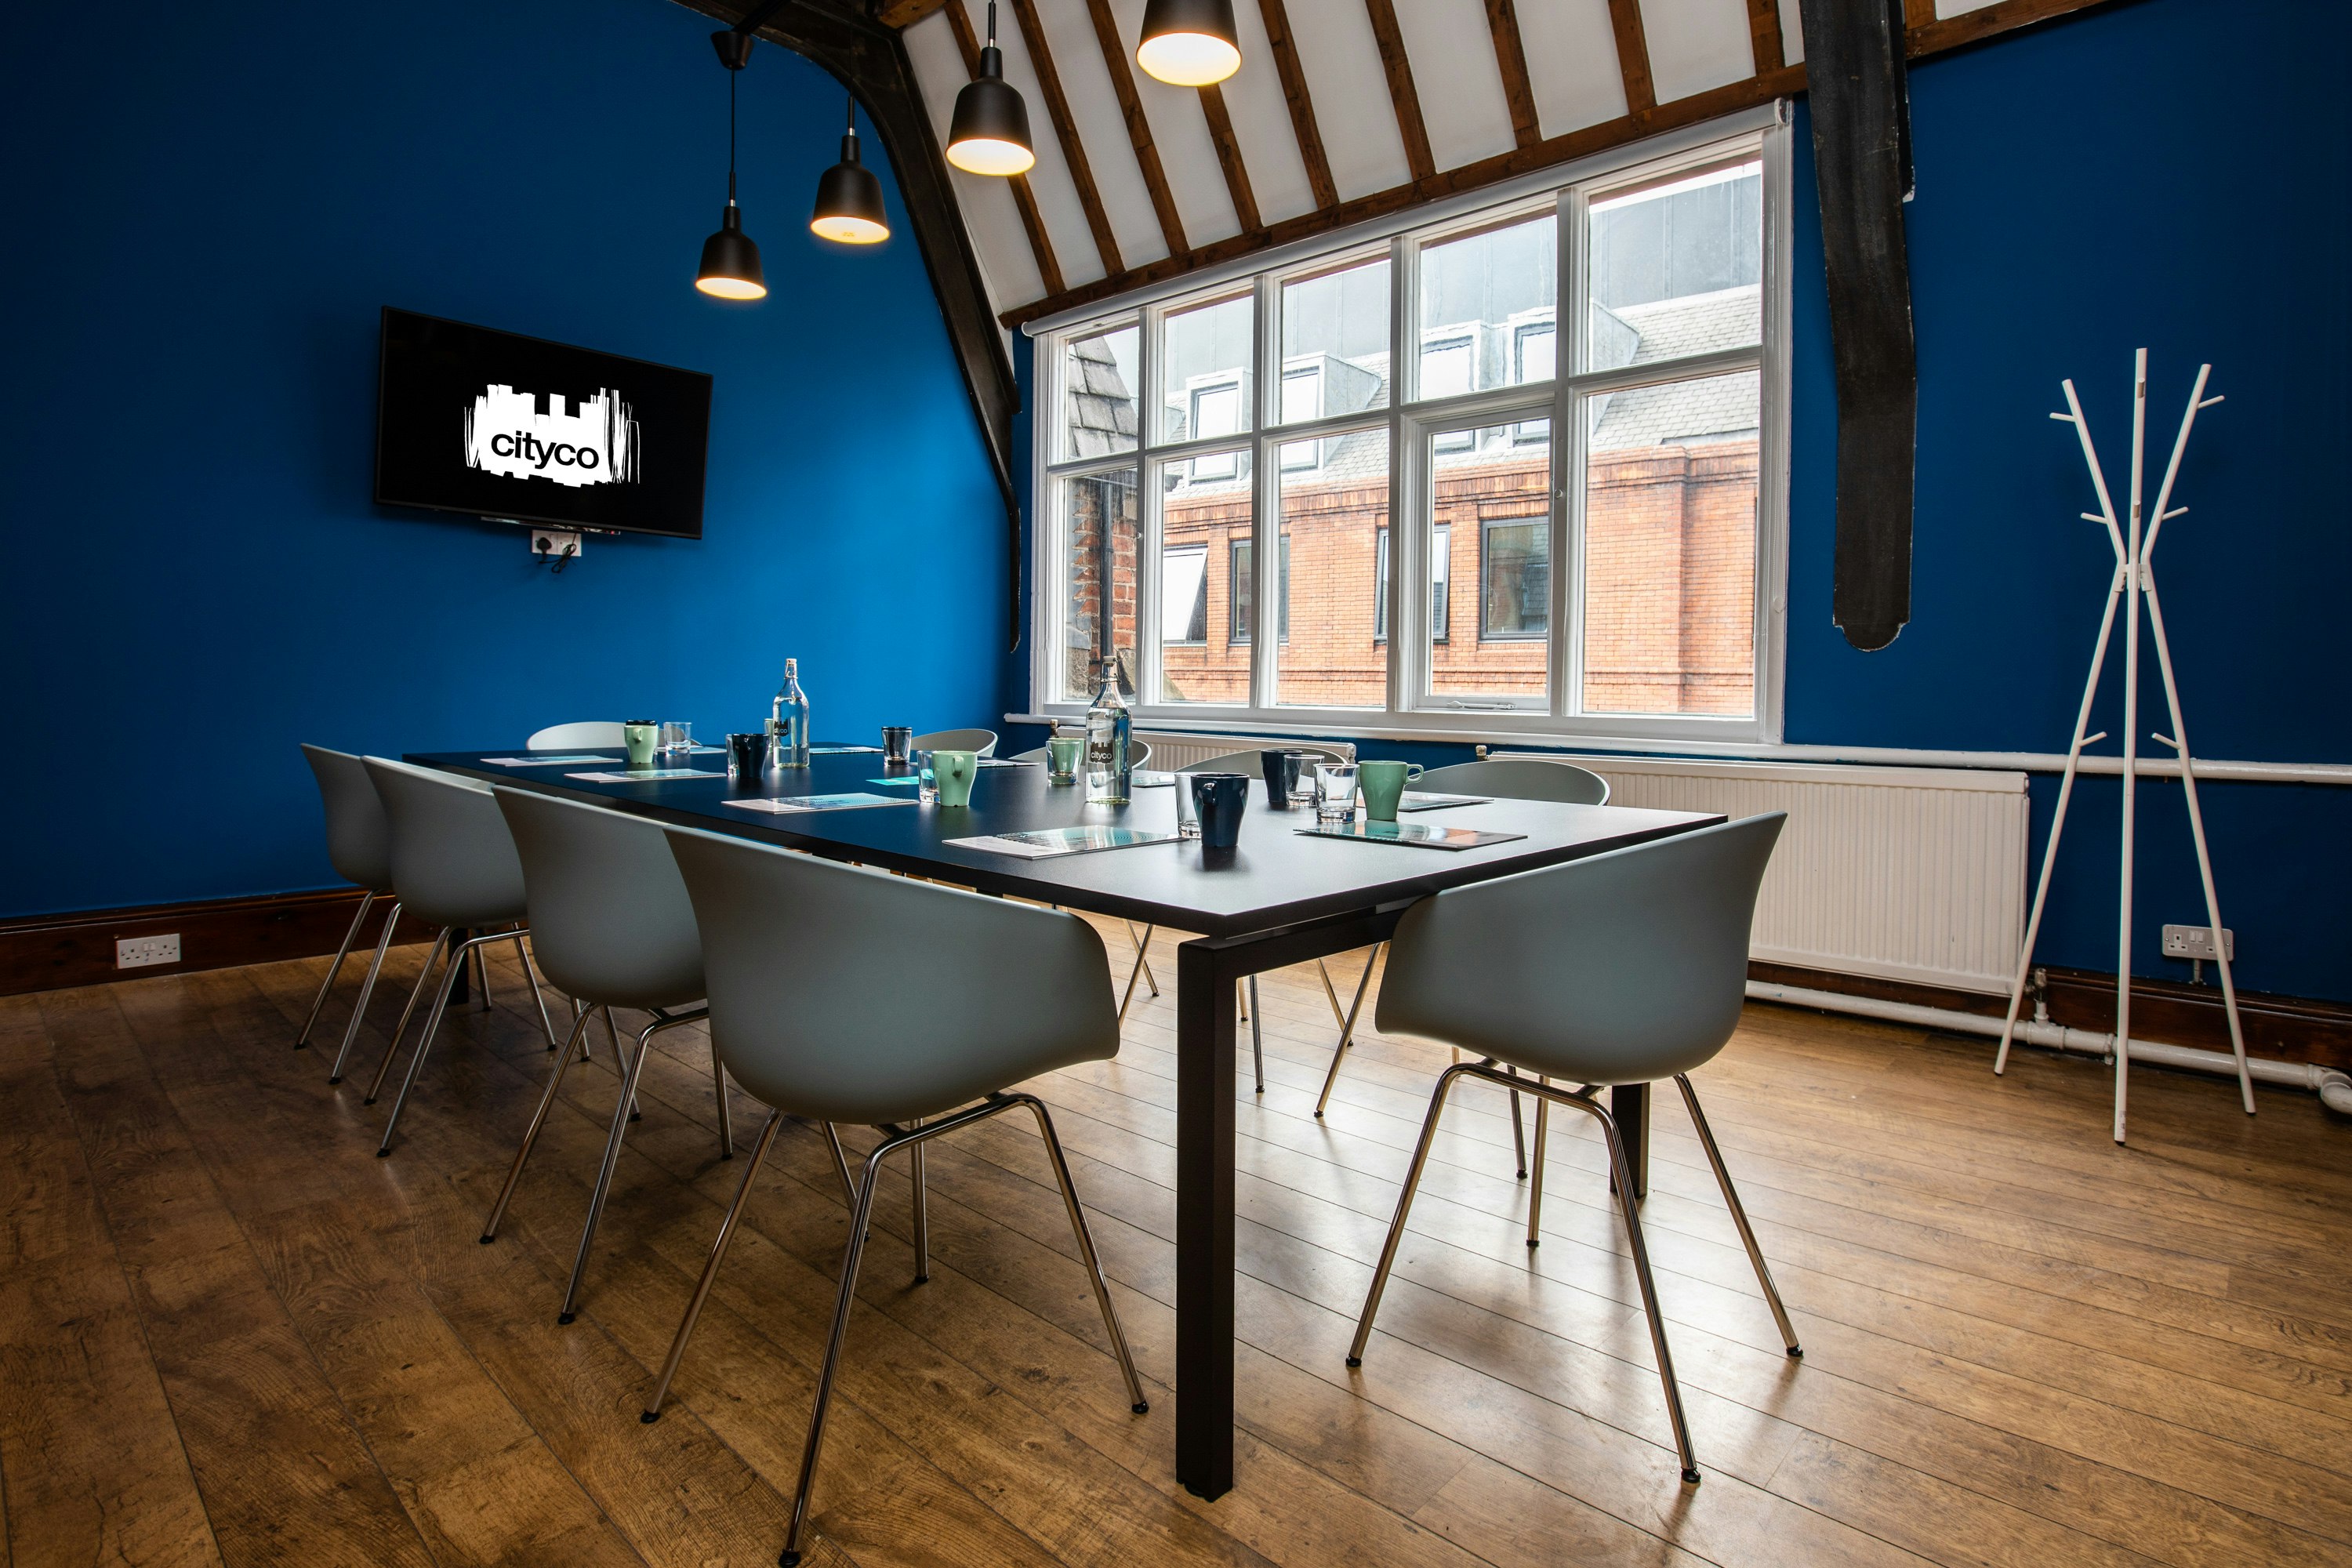 CityCo Manchester: Event & Meeting Spaces - The Cotton Room image 1